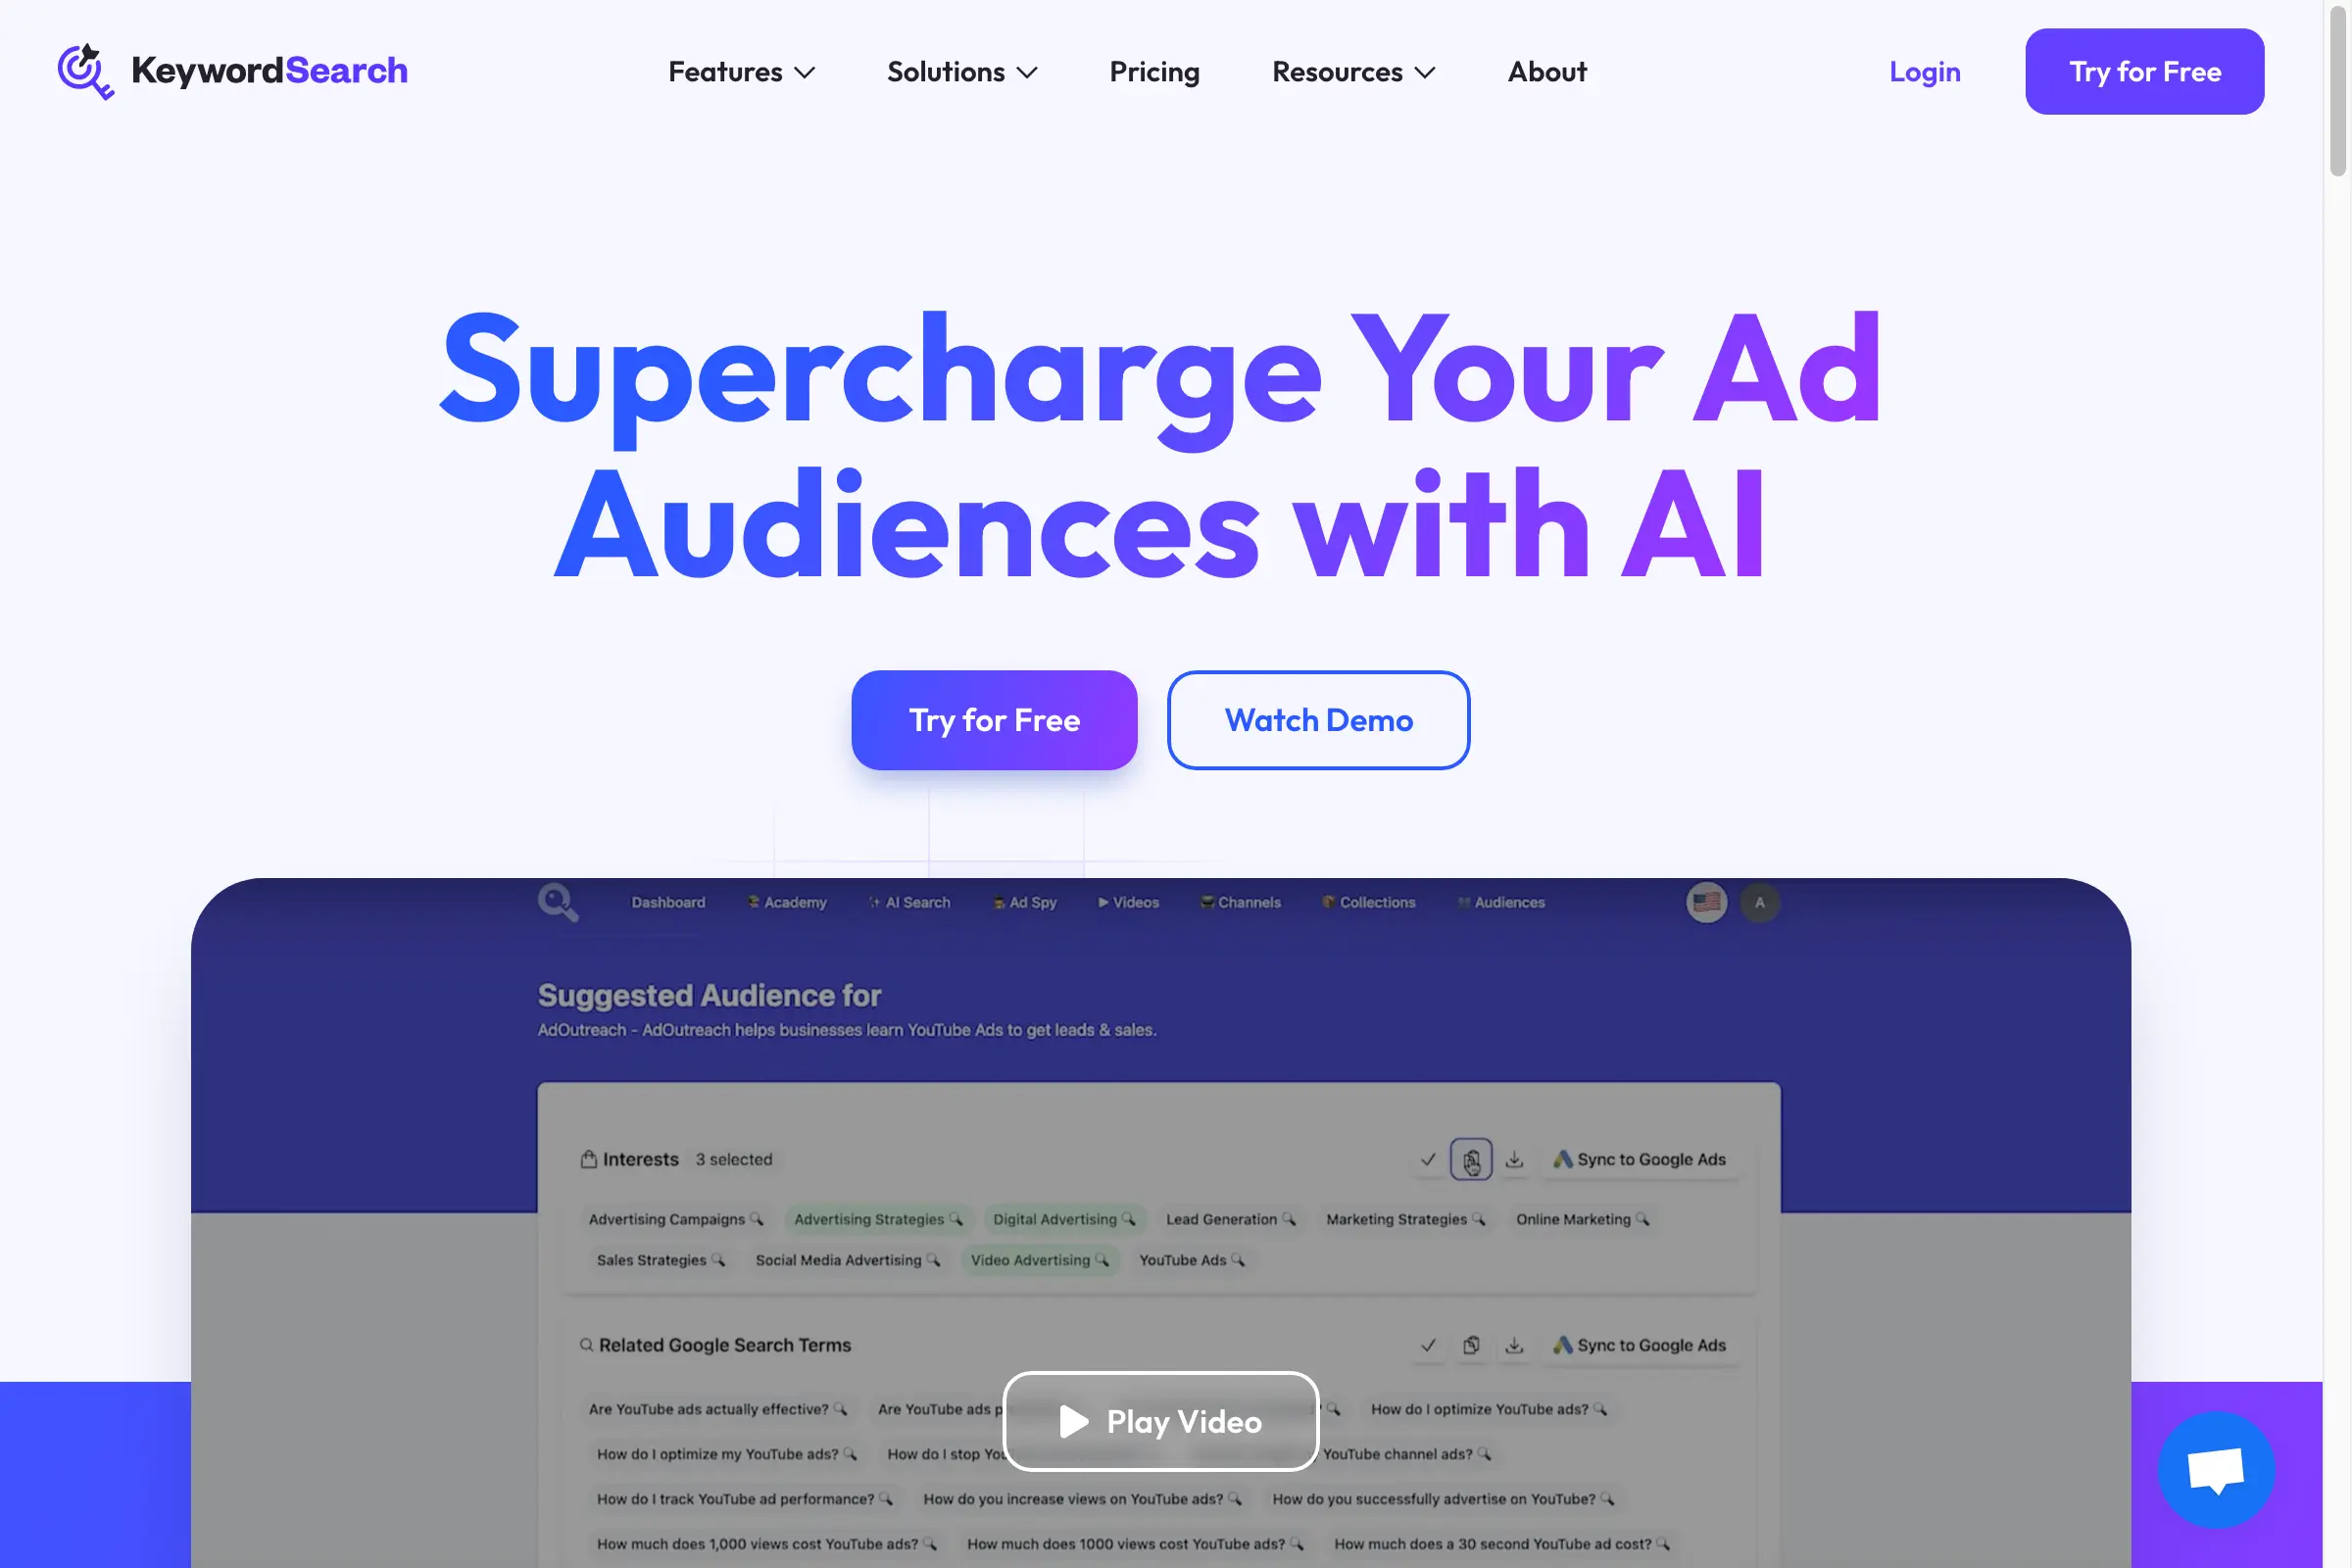 KeywordSearch - SuperCharge Ad Audiences with AI